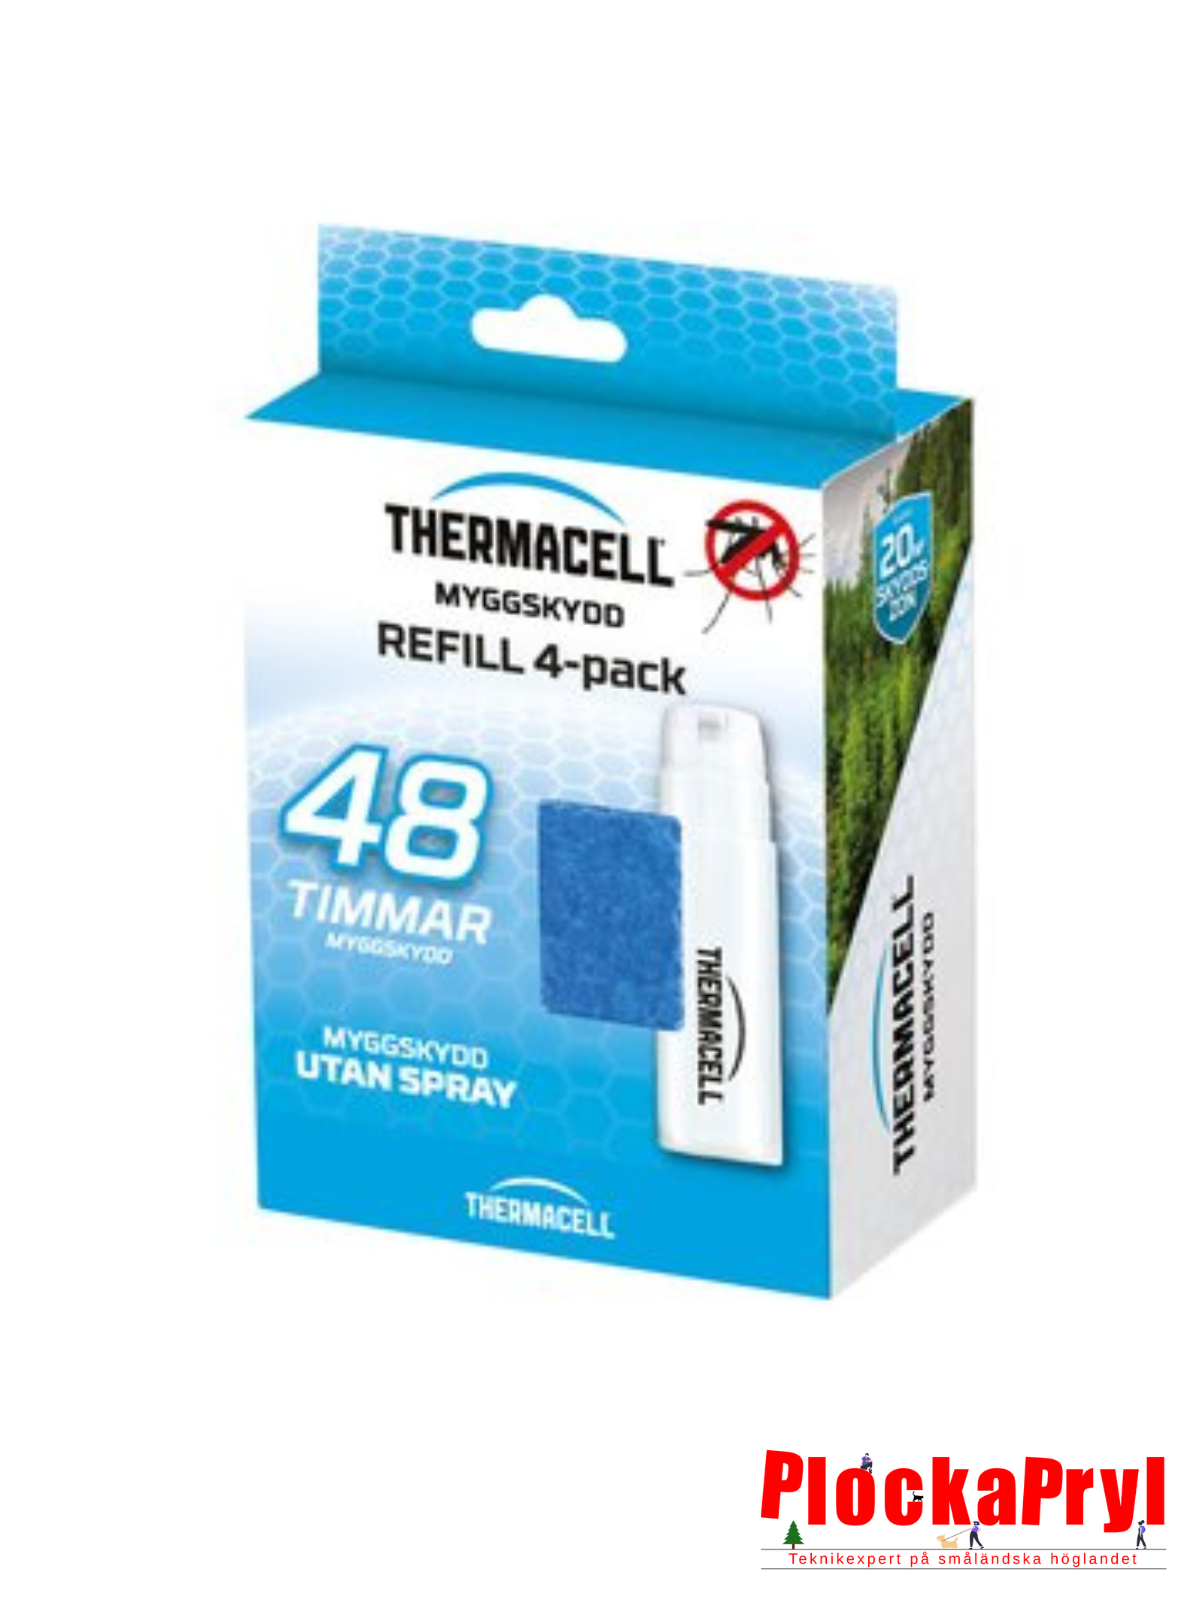 Thermacell 48h refill